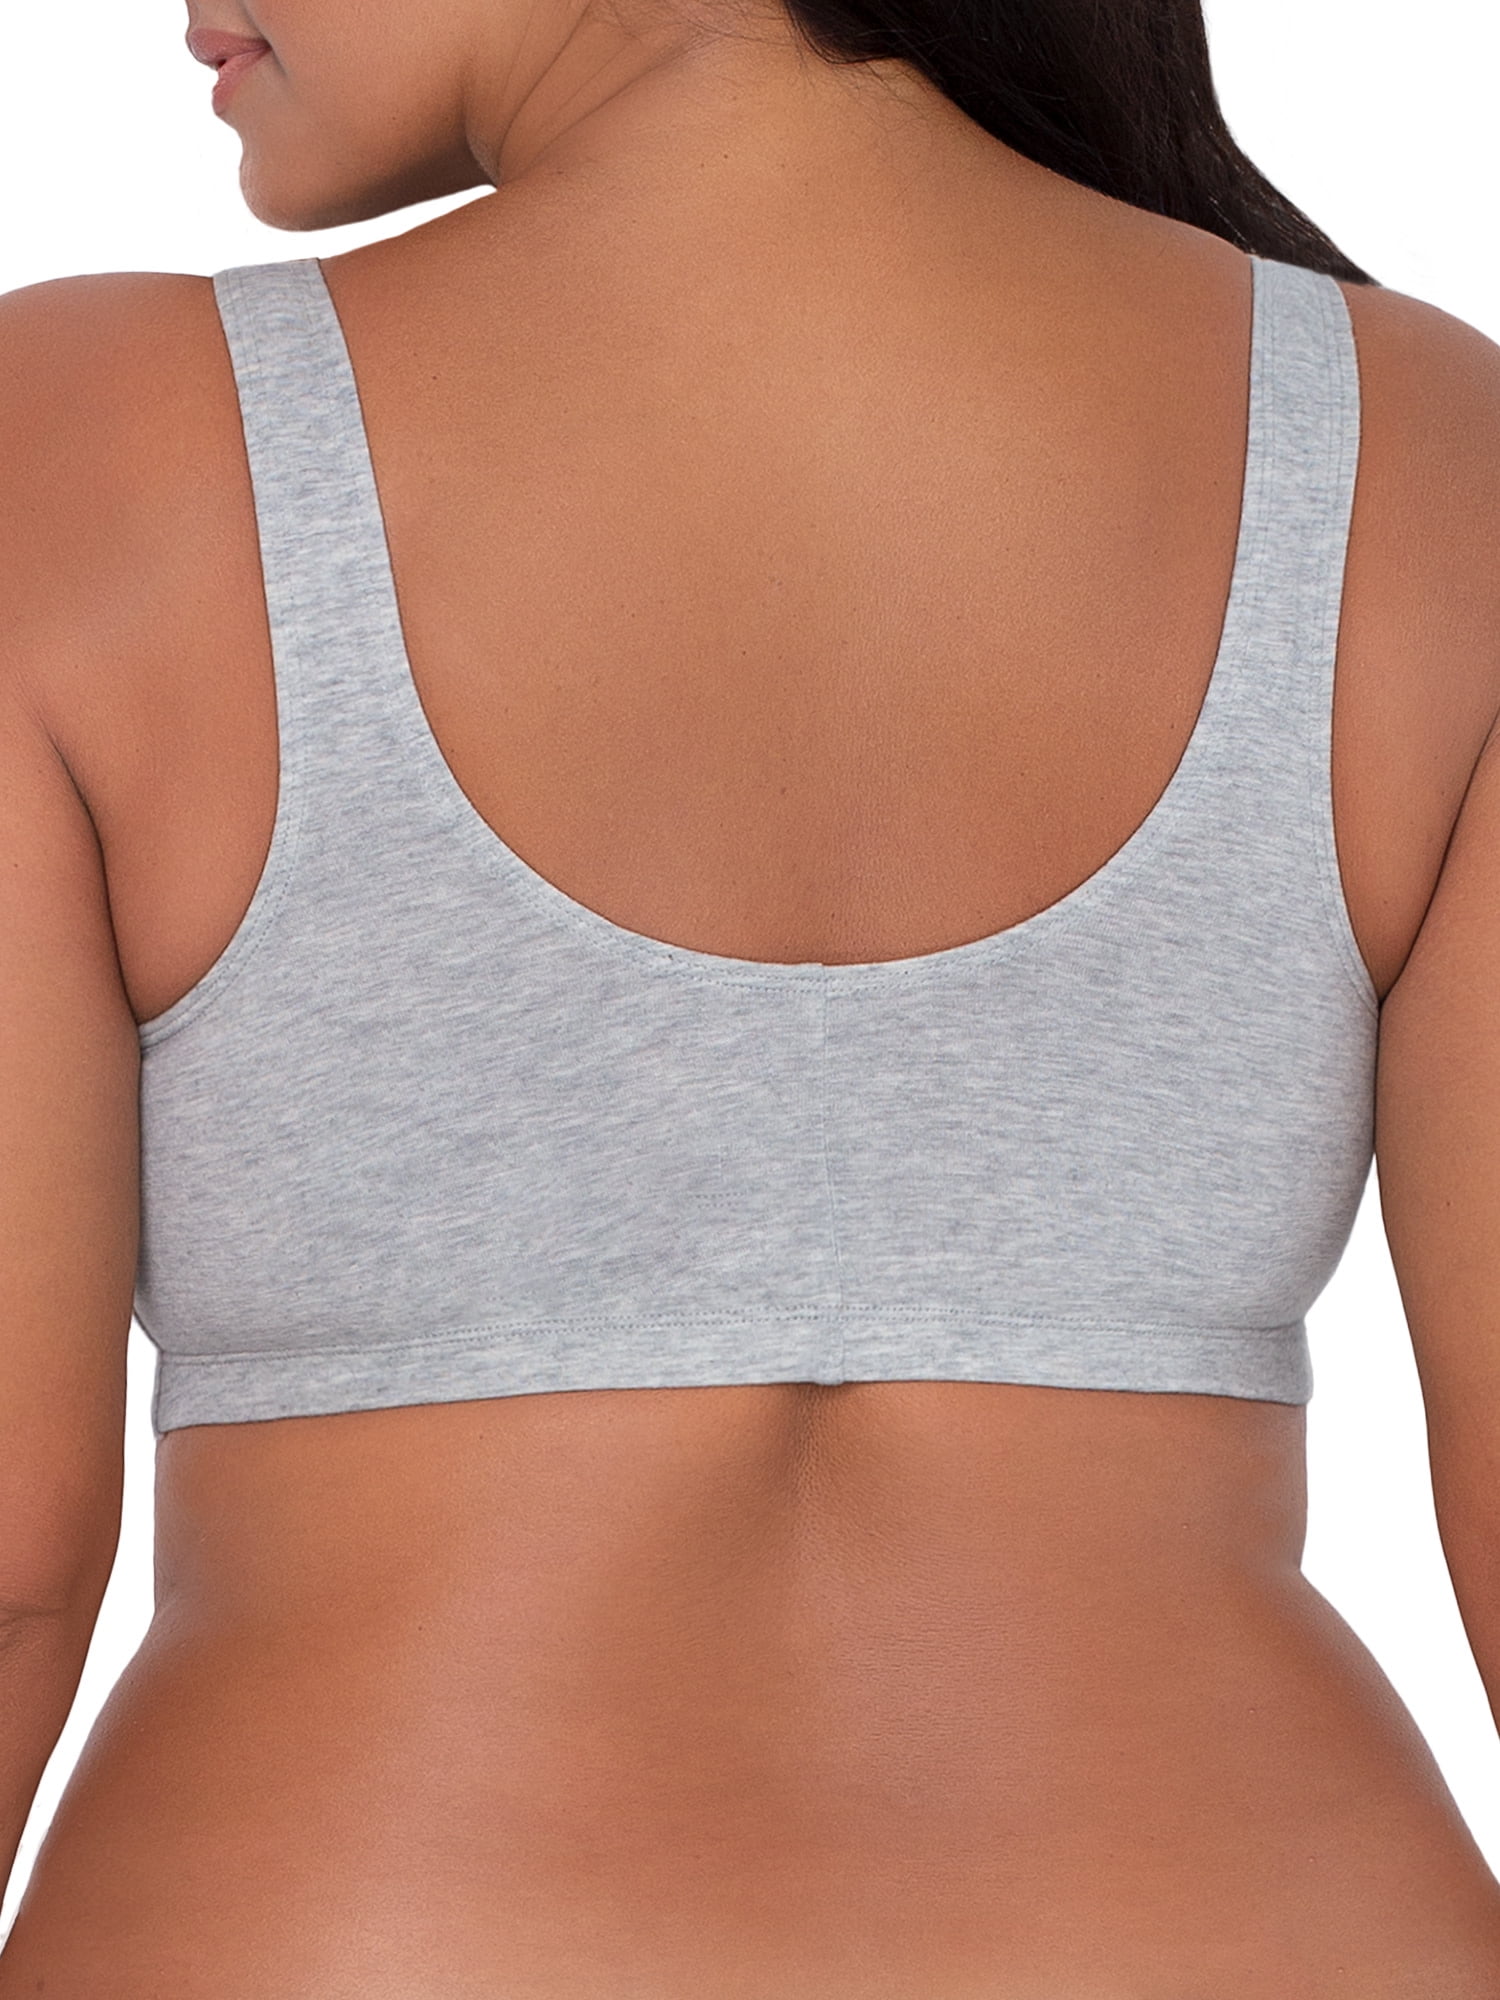 Fruit of The Loom Women's Front Close Builtup Sports Bra White 1 48 for  sale online